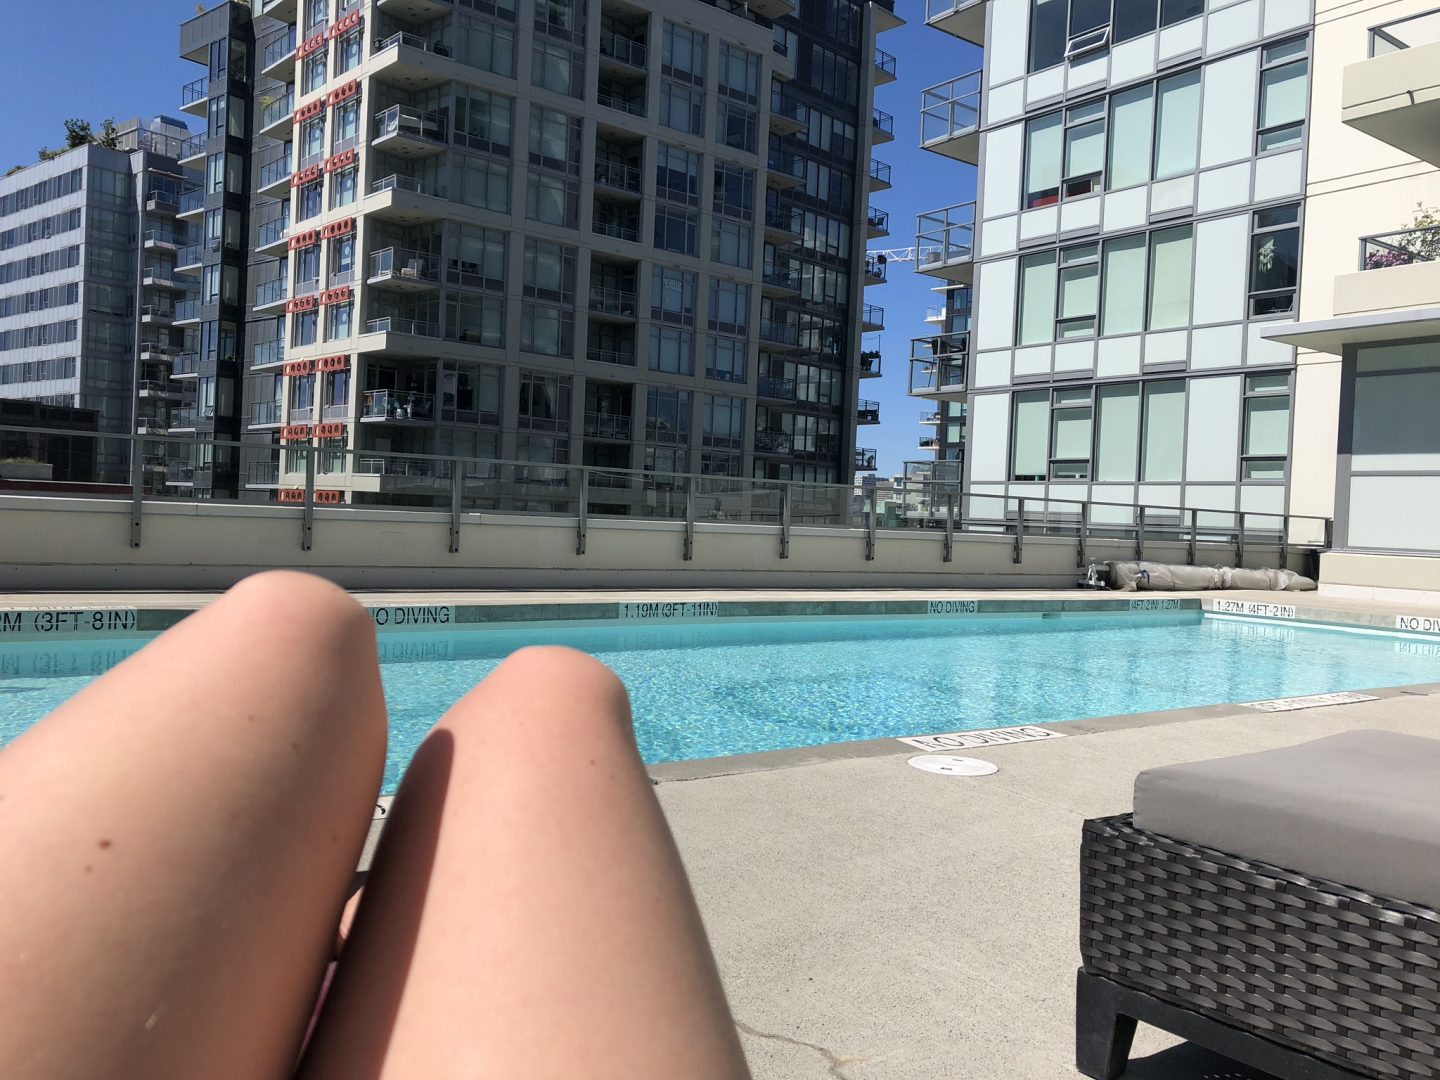 Rooftop swimming pool in Olympic Village, Vancouver